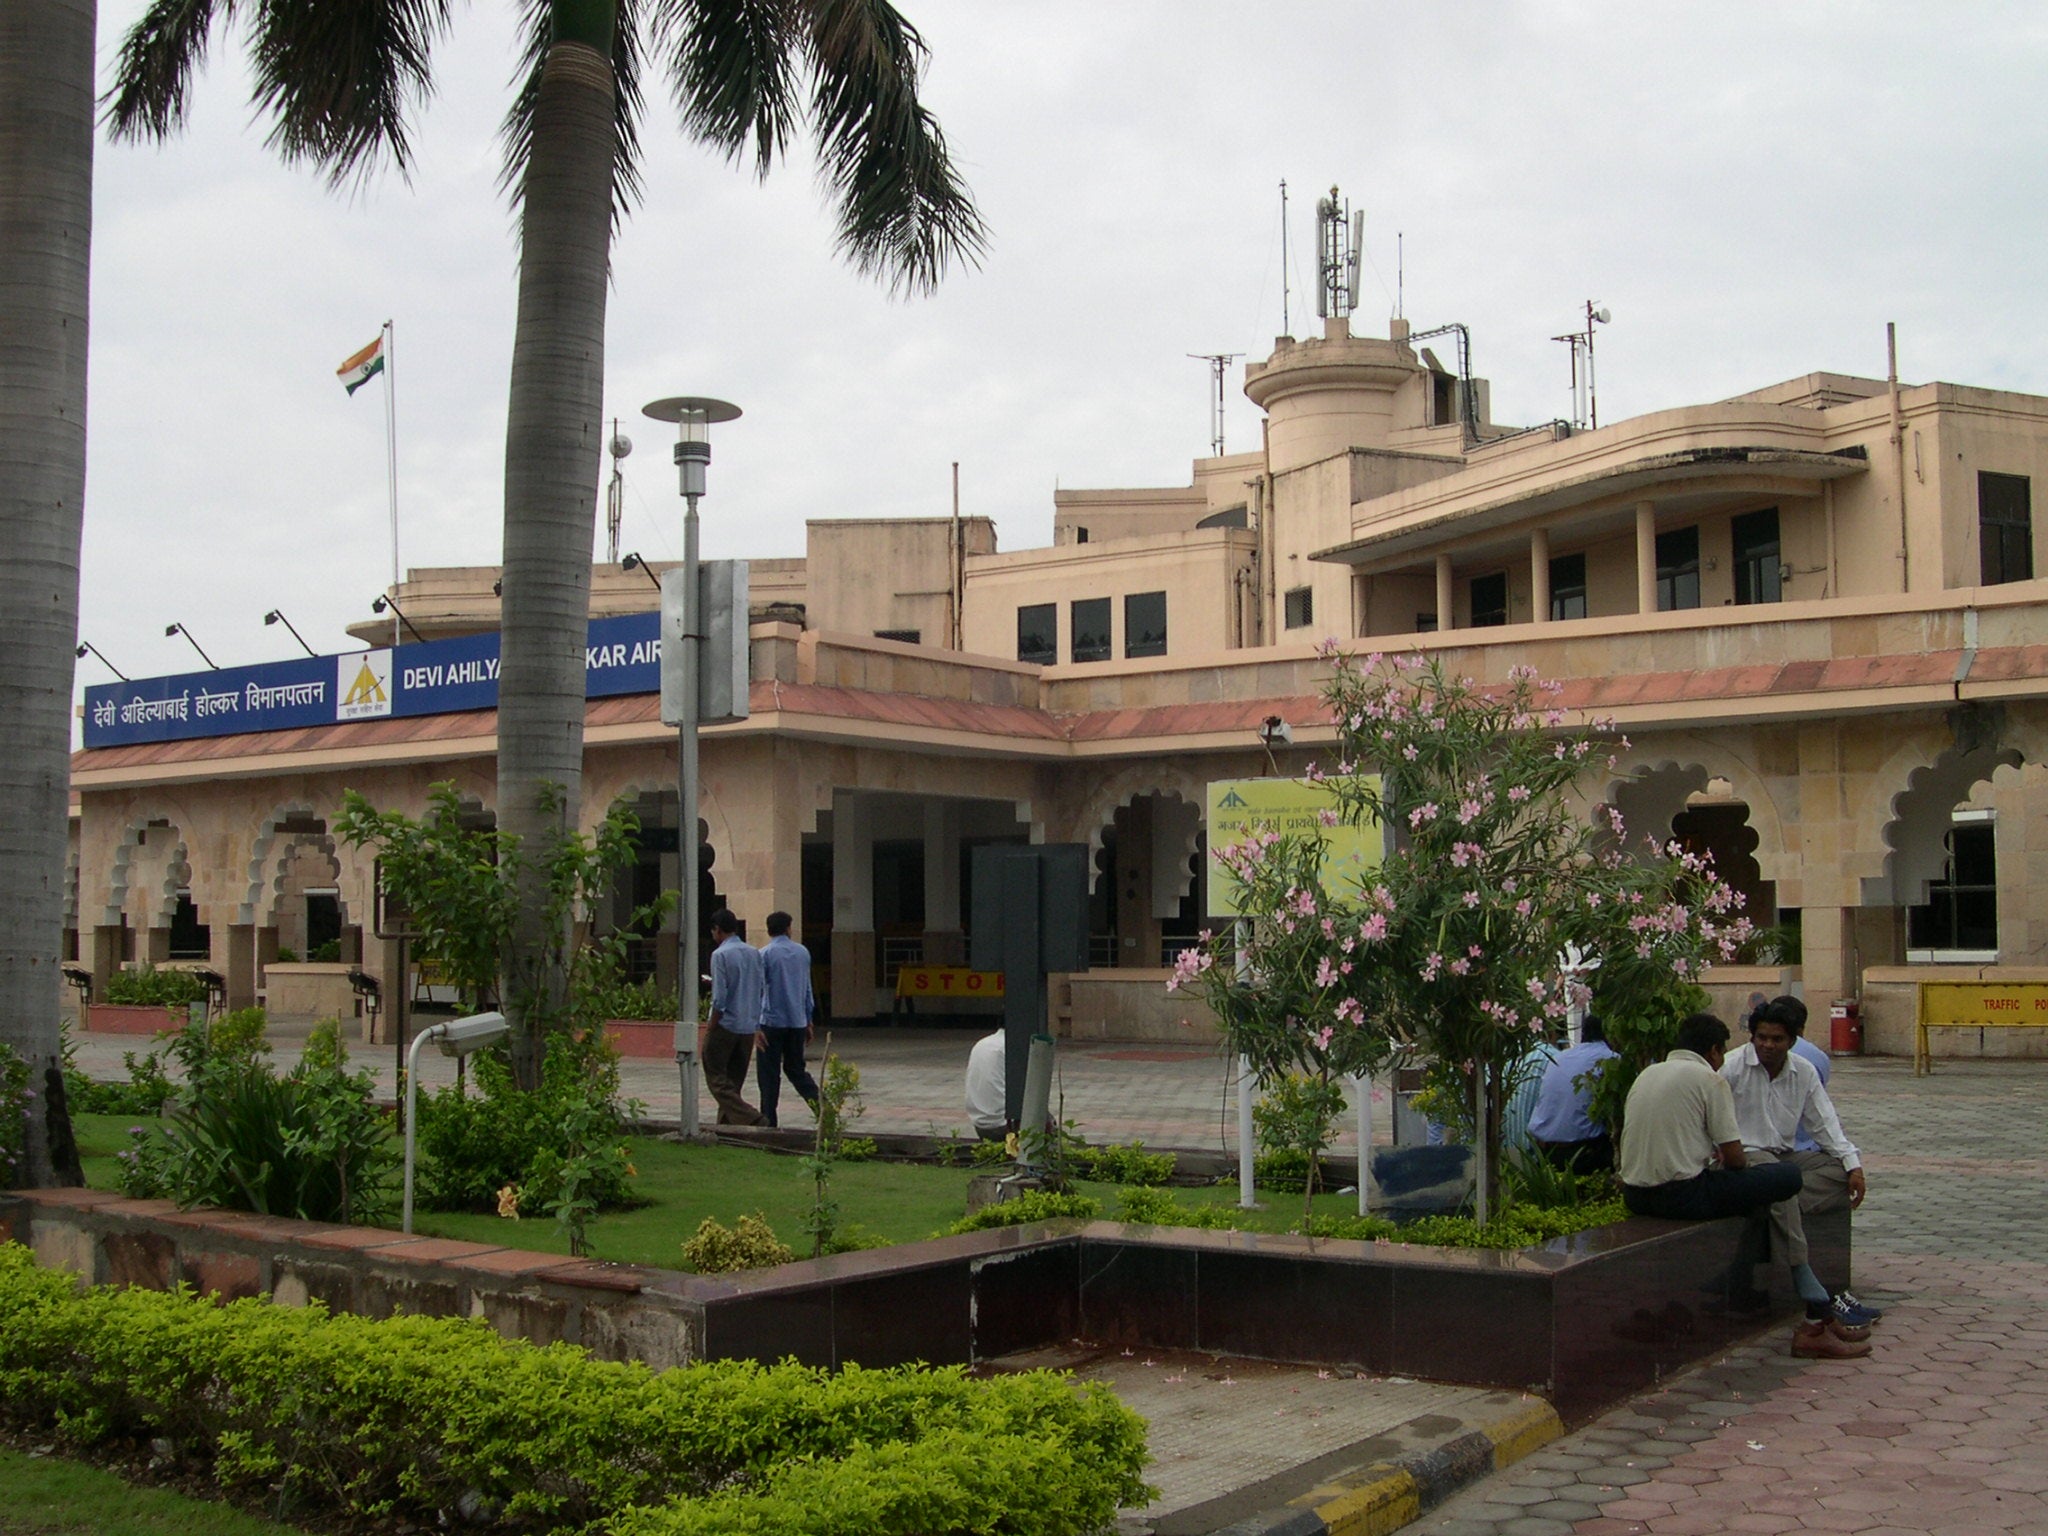 File image: The woman was eventually asked to leave the remains with a friend at Indore’s Devi Ahilyabai Holkar Airport (pictured)